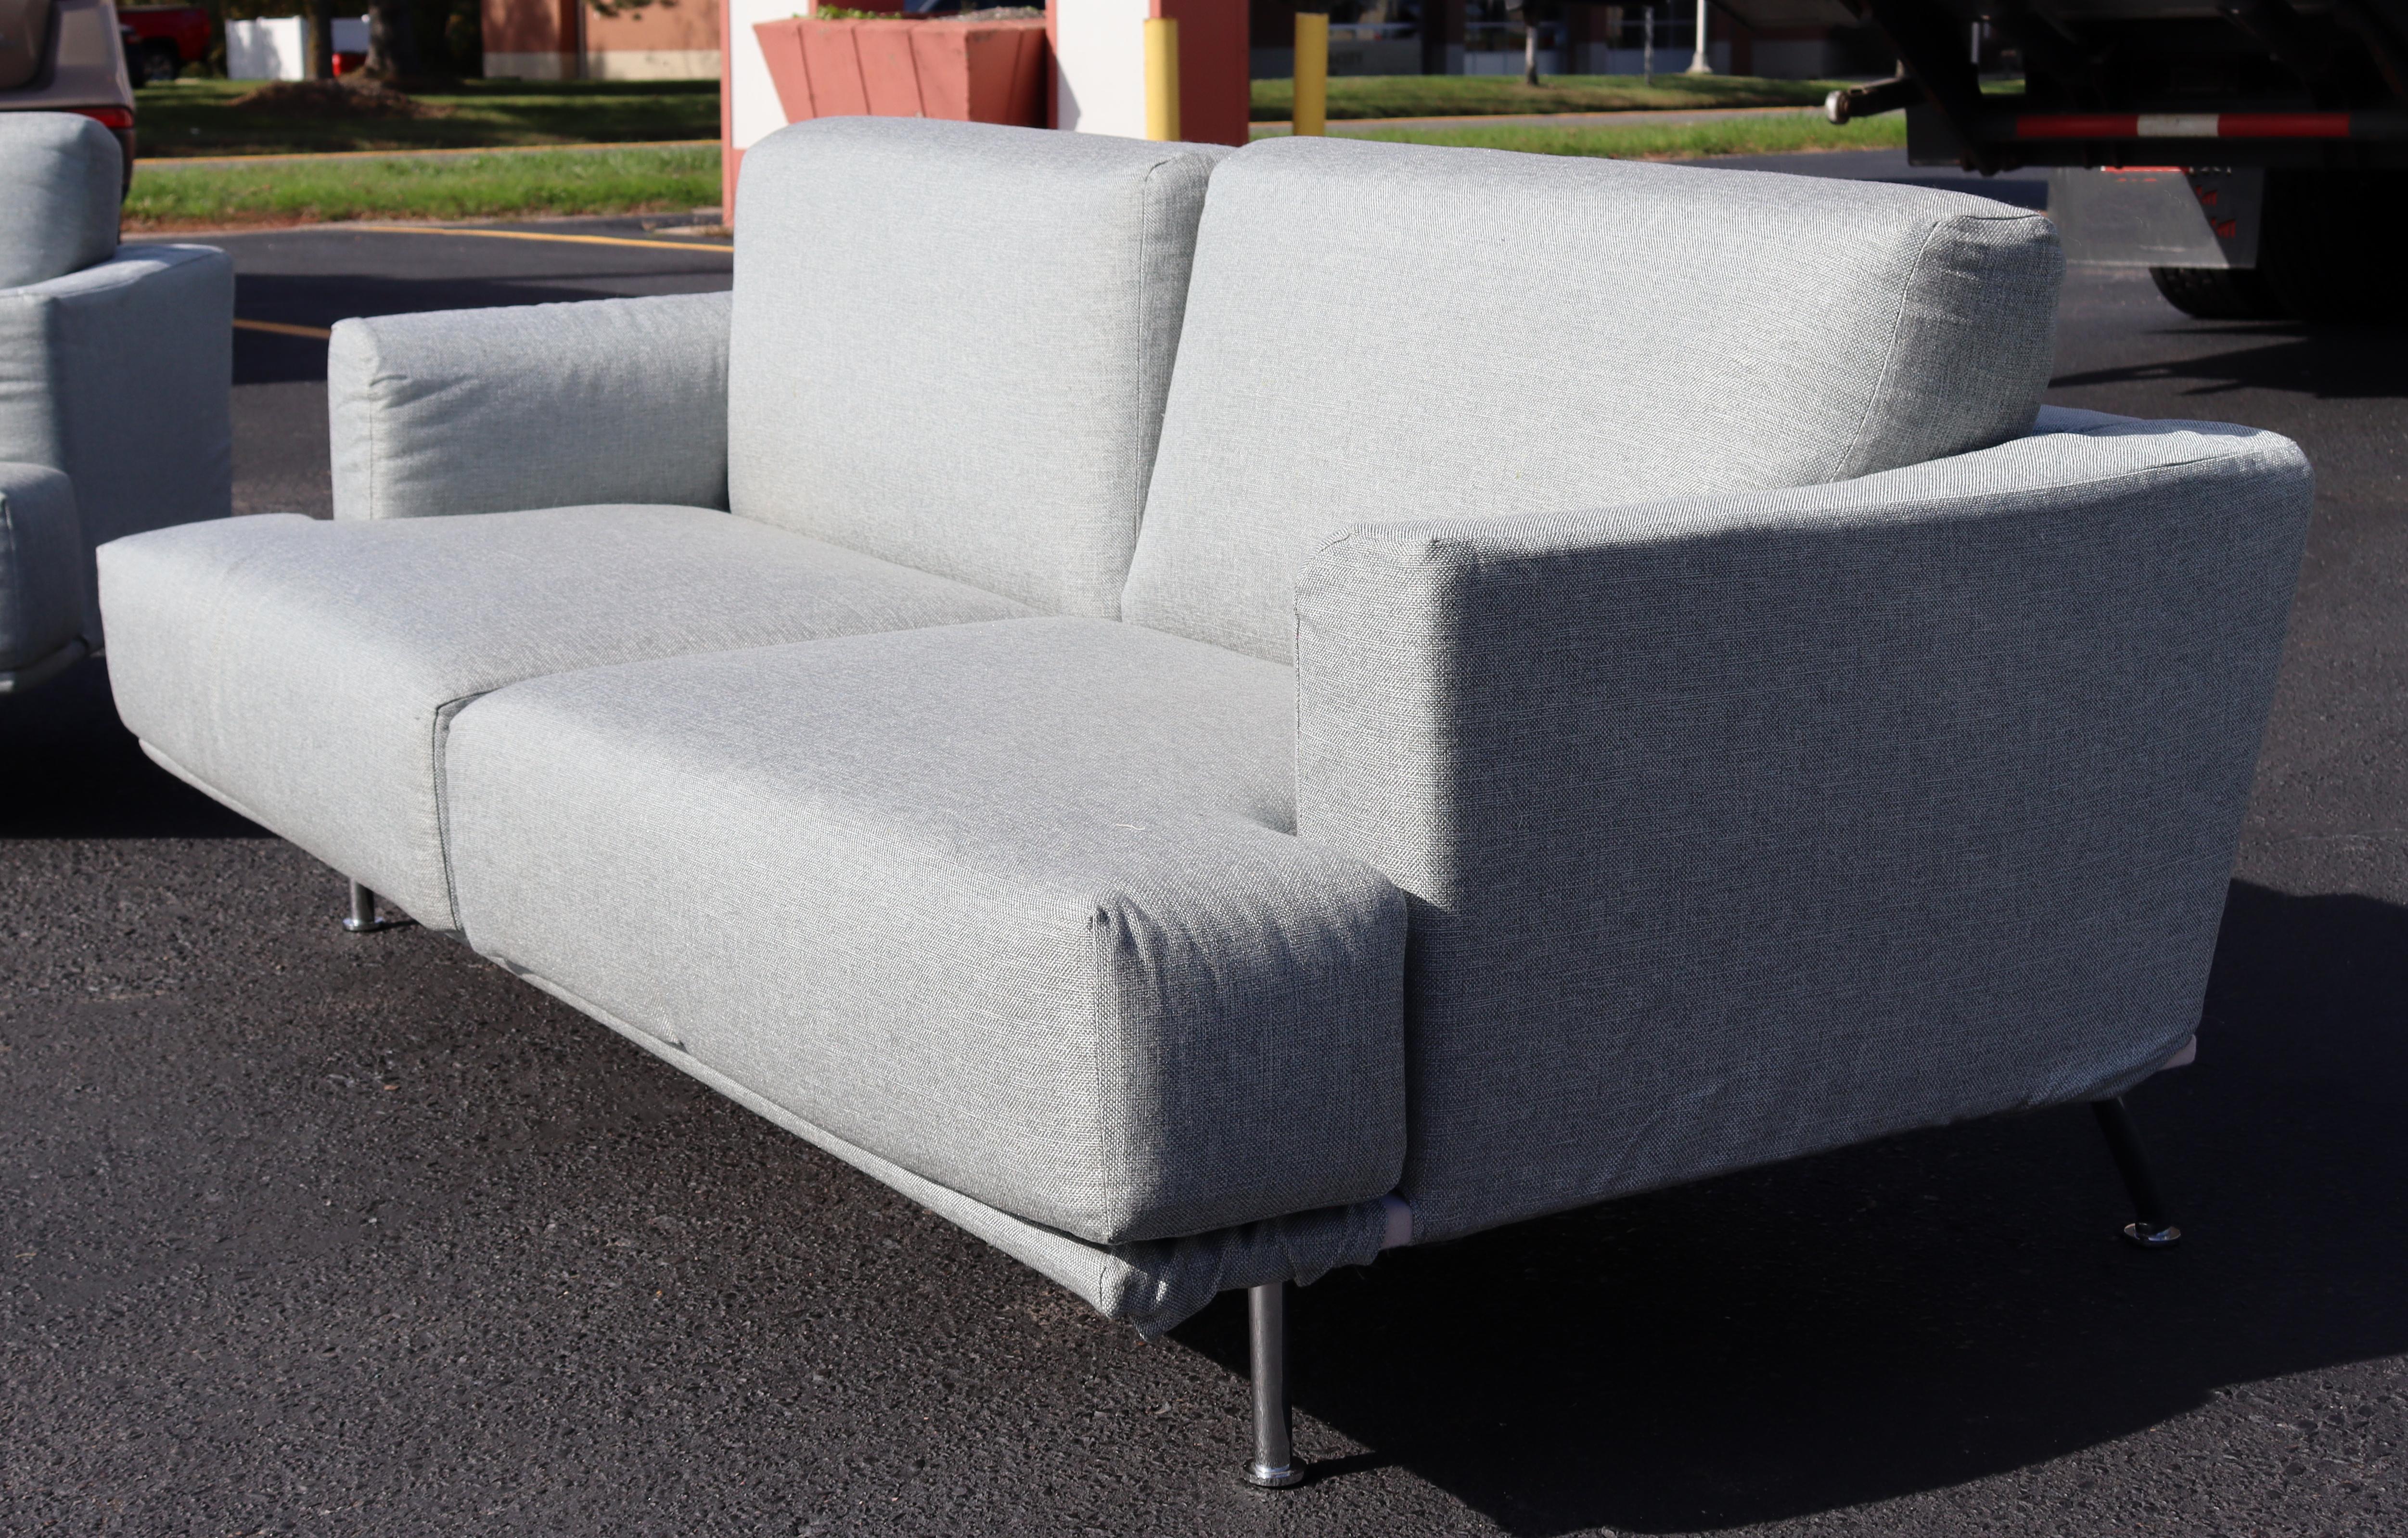 For your consideration is a gorgeous Nest sofa, with a dove gray upholstery on a tubular chrome base, made in the Italy, by Piero Lissoni for Cassina, circa the 1990s. In excellent condition. The dimensions are 77